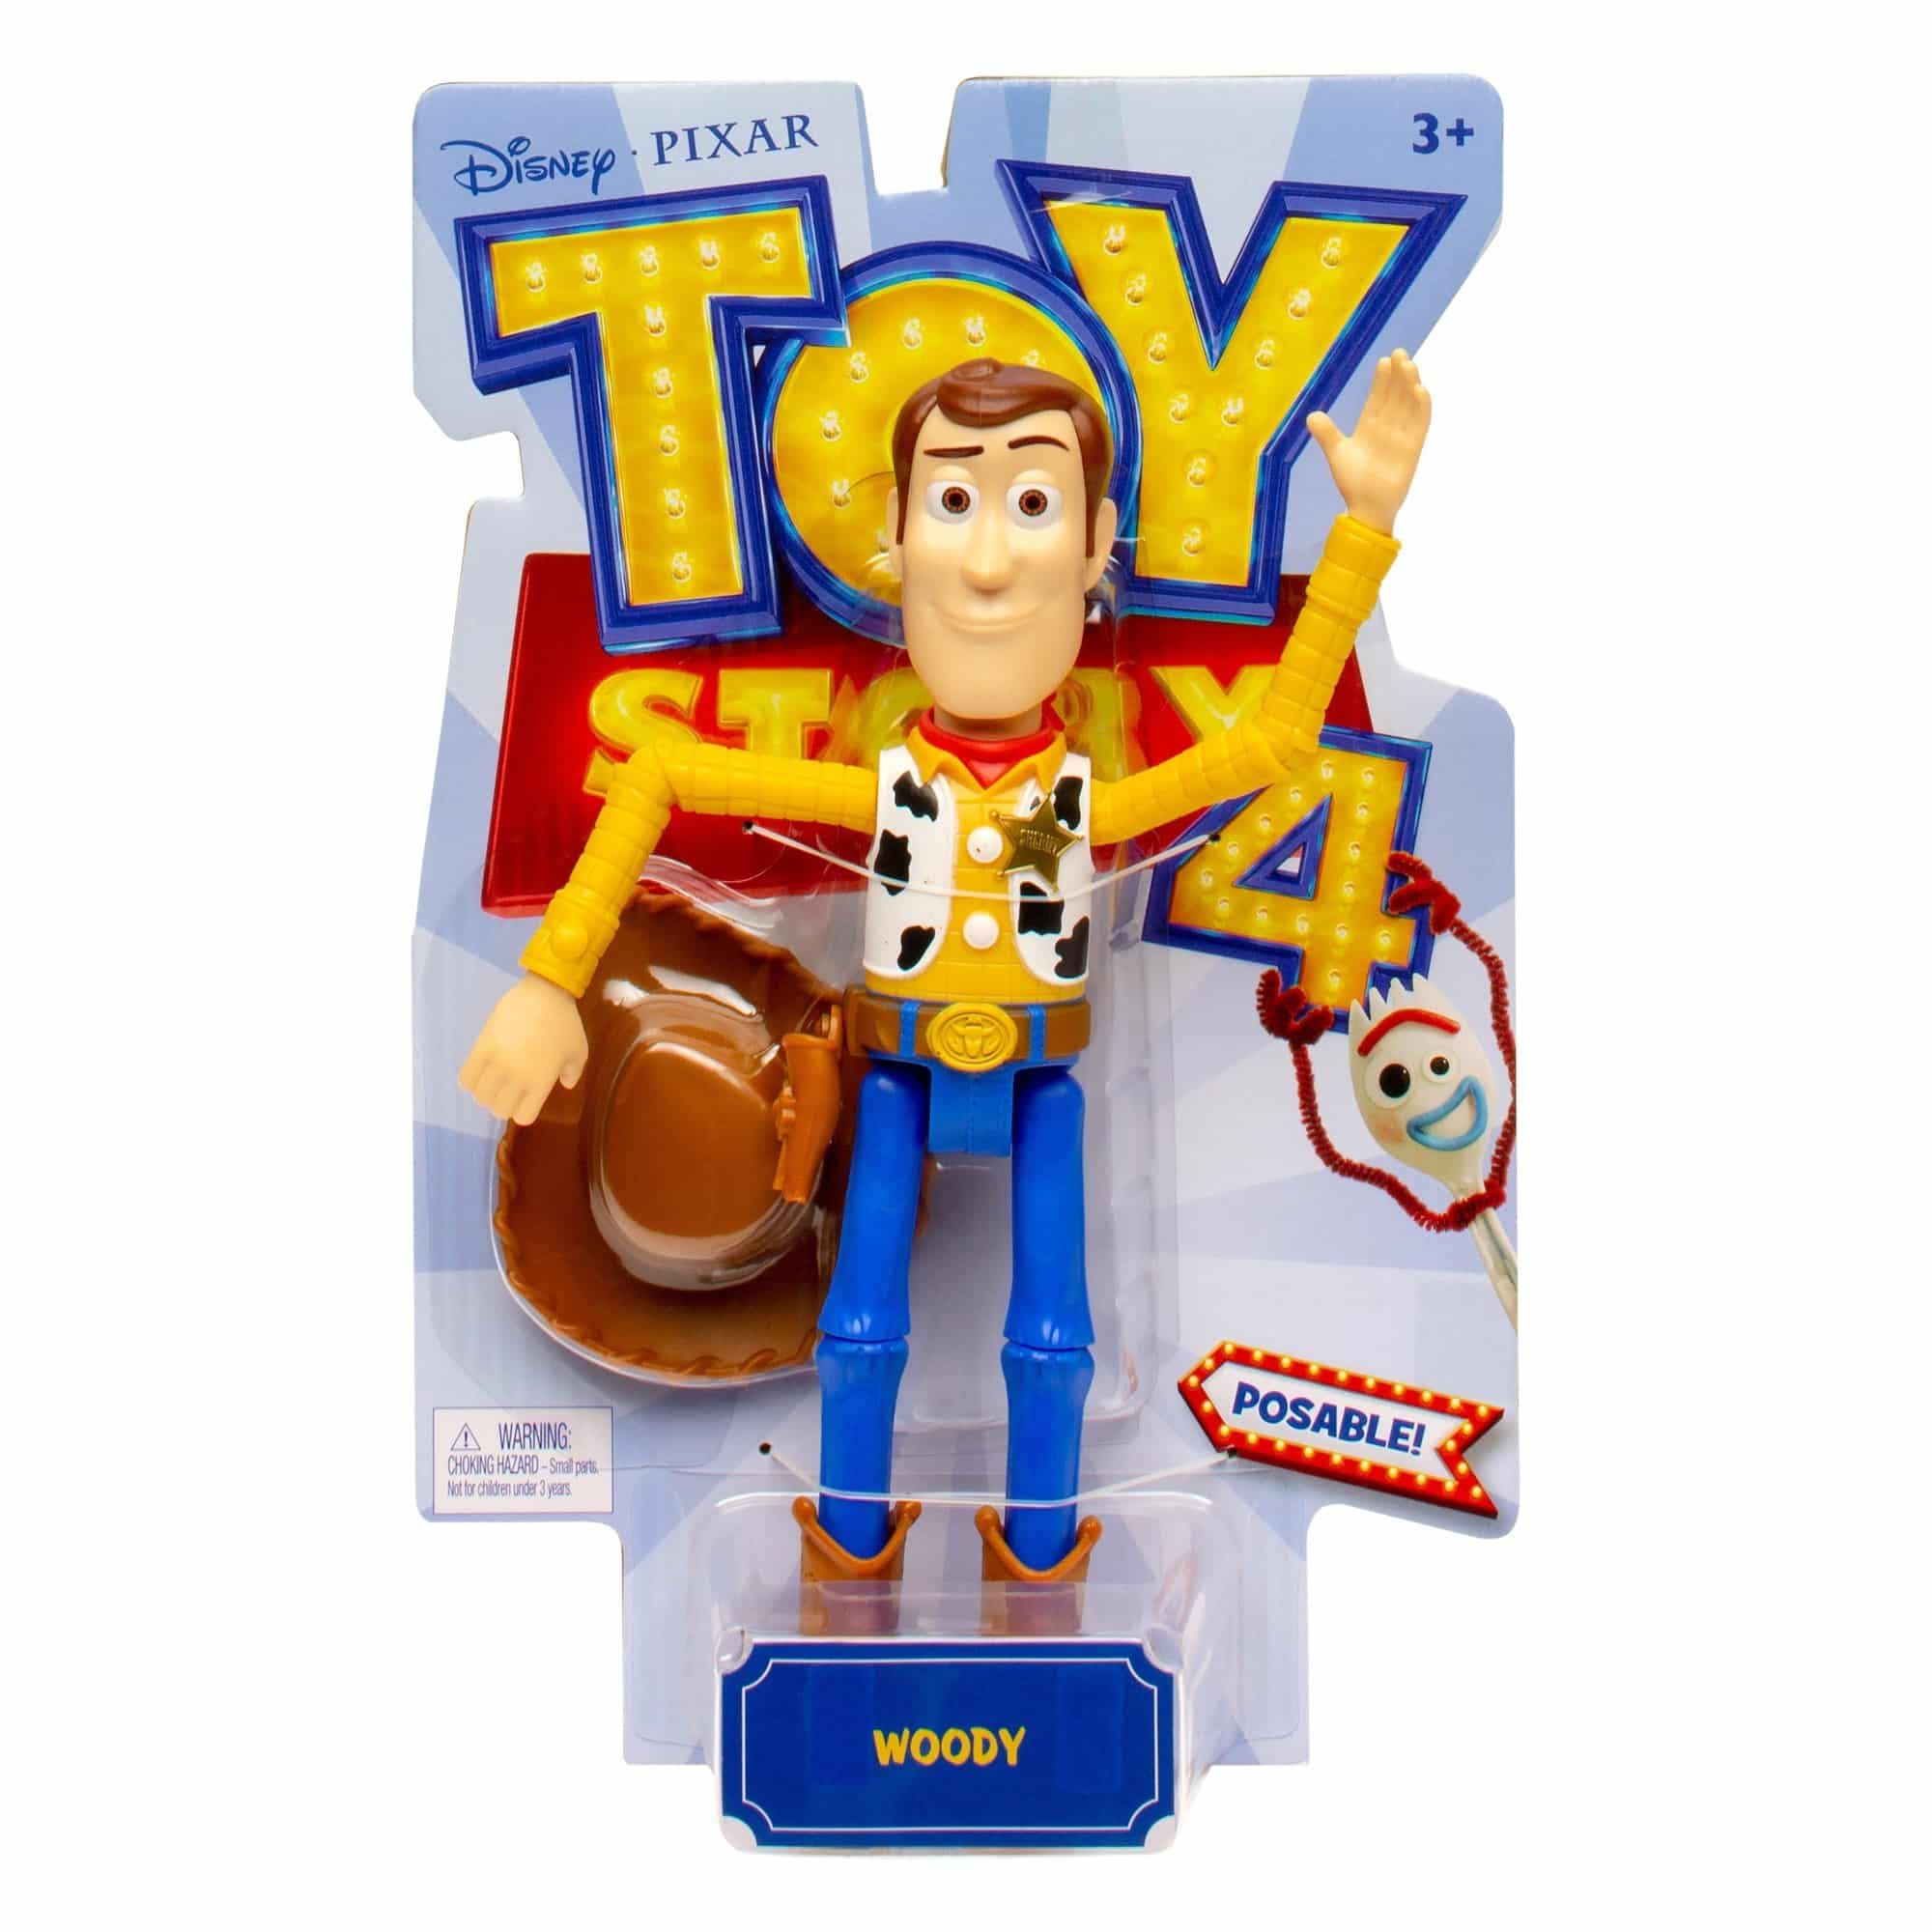 Toy Story 4 - 7" Figure Assortment - Woody